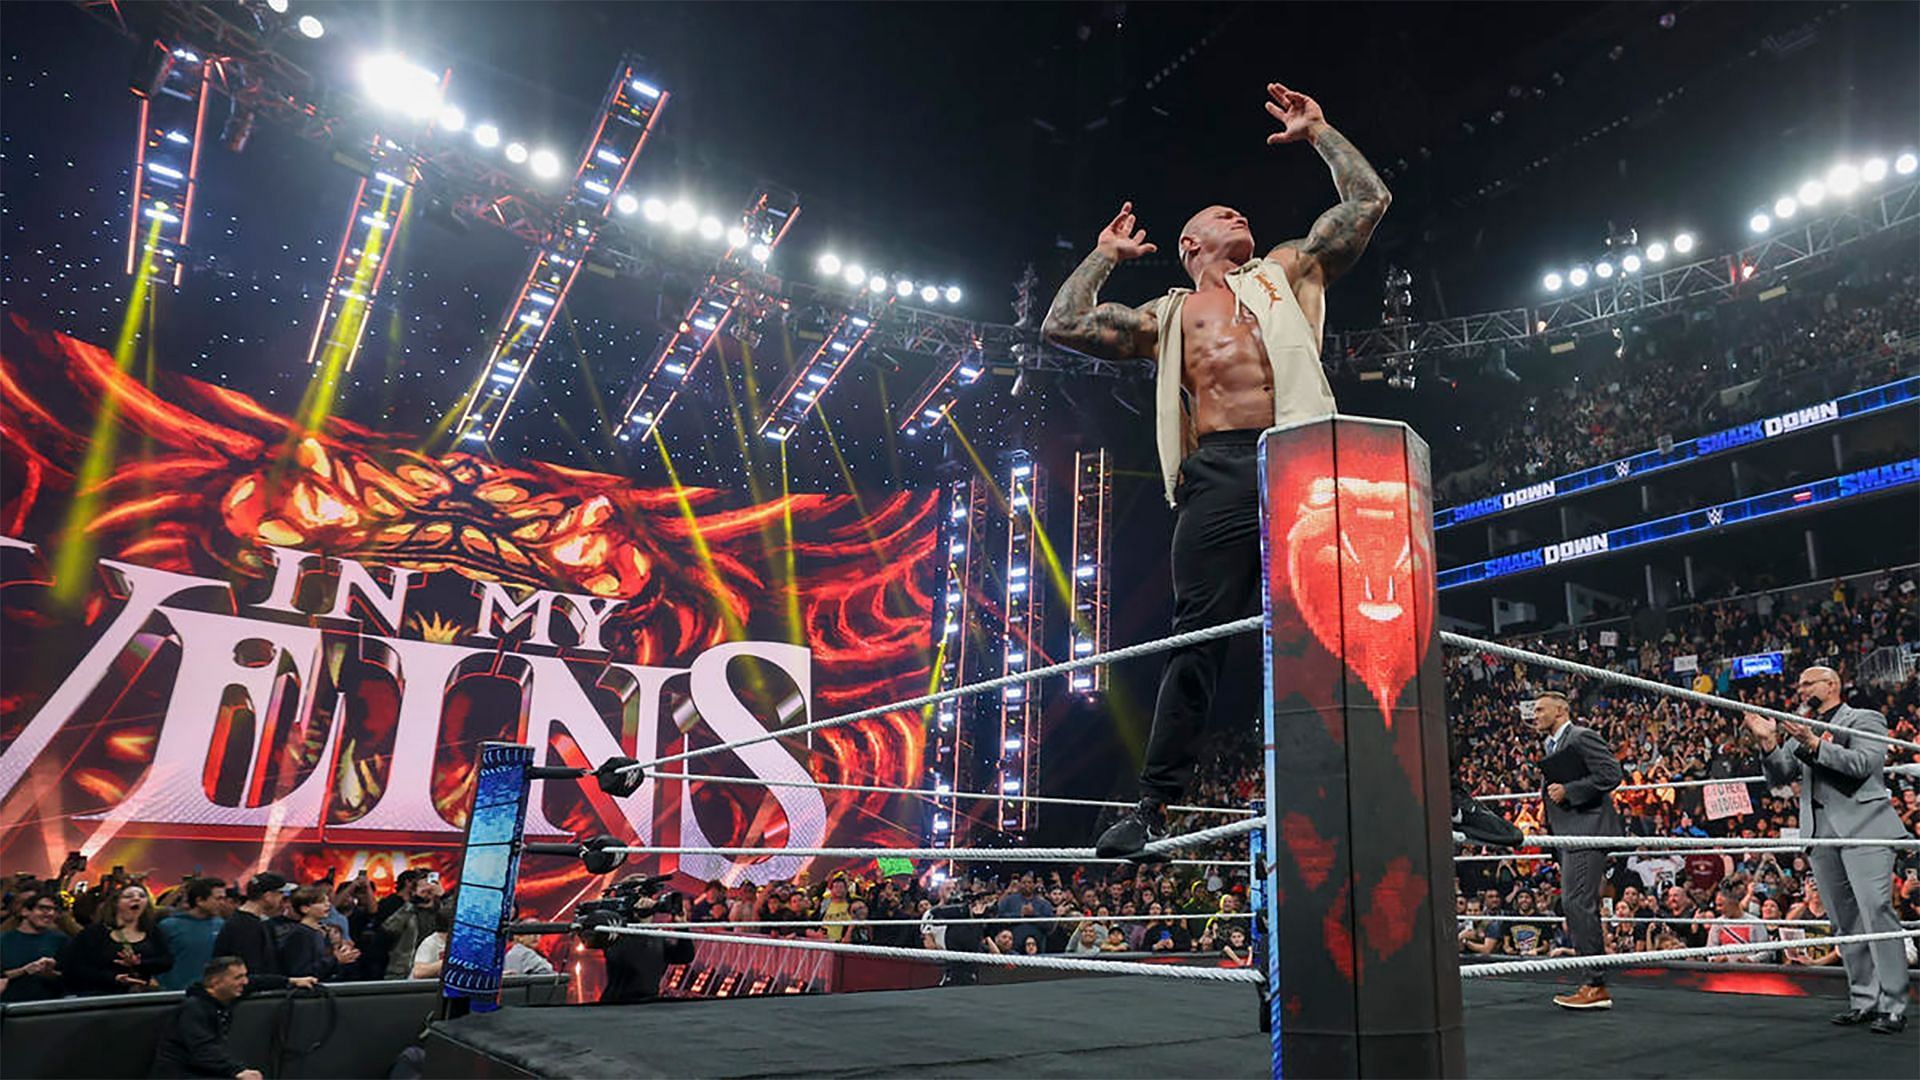 Randy Orton poses in the ring for WWE fans